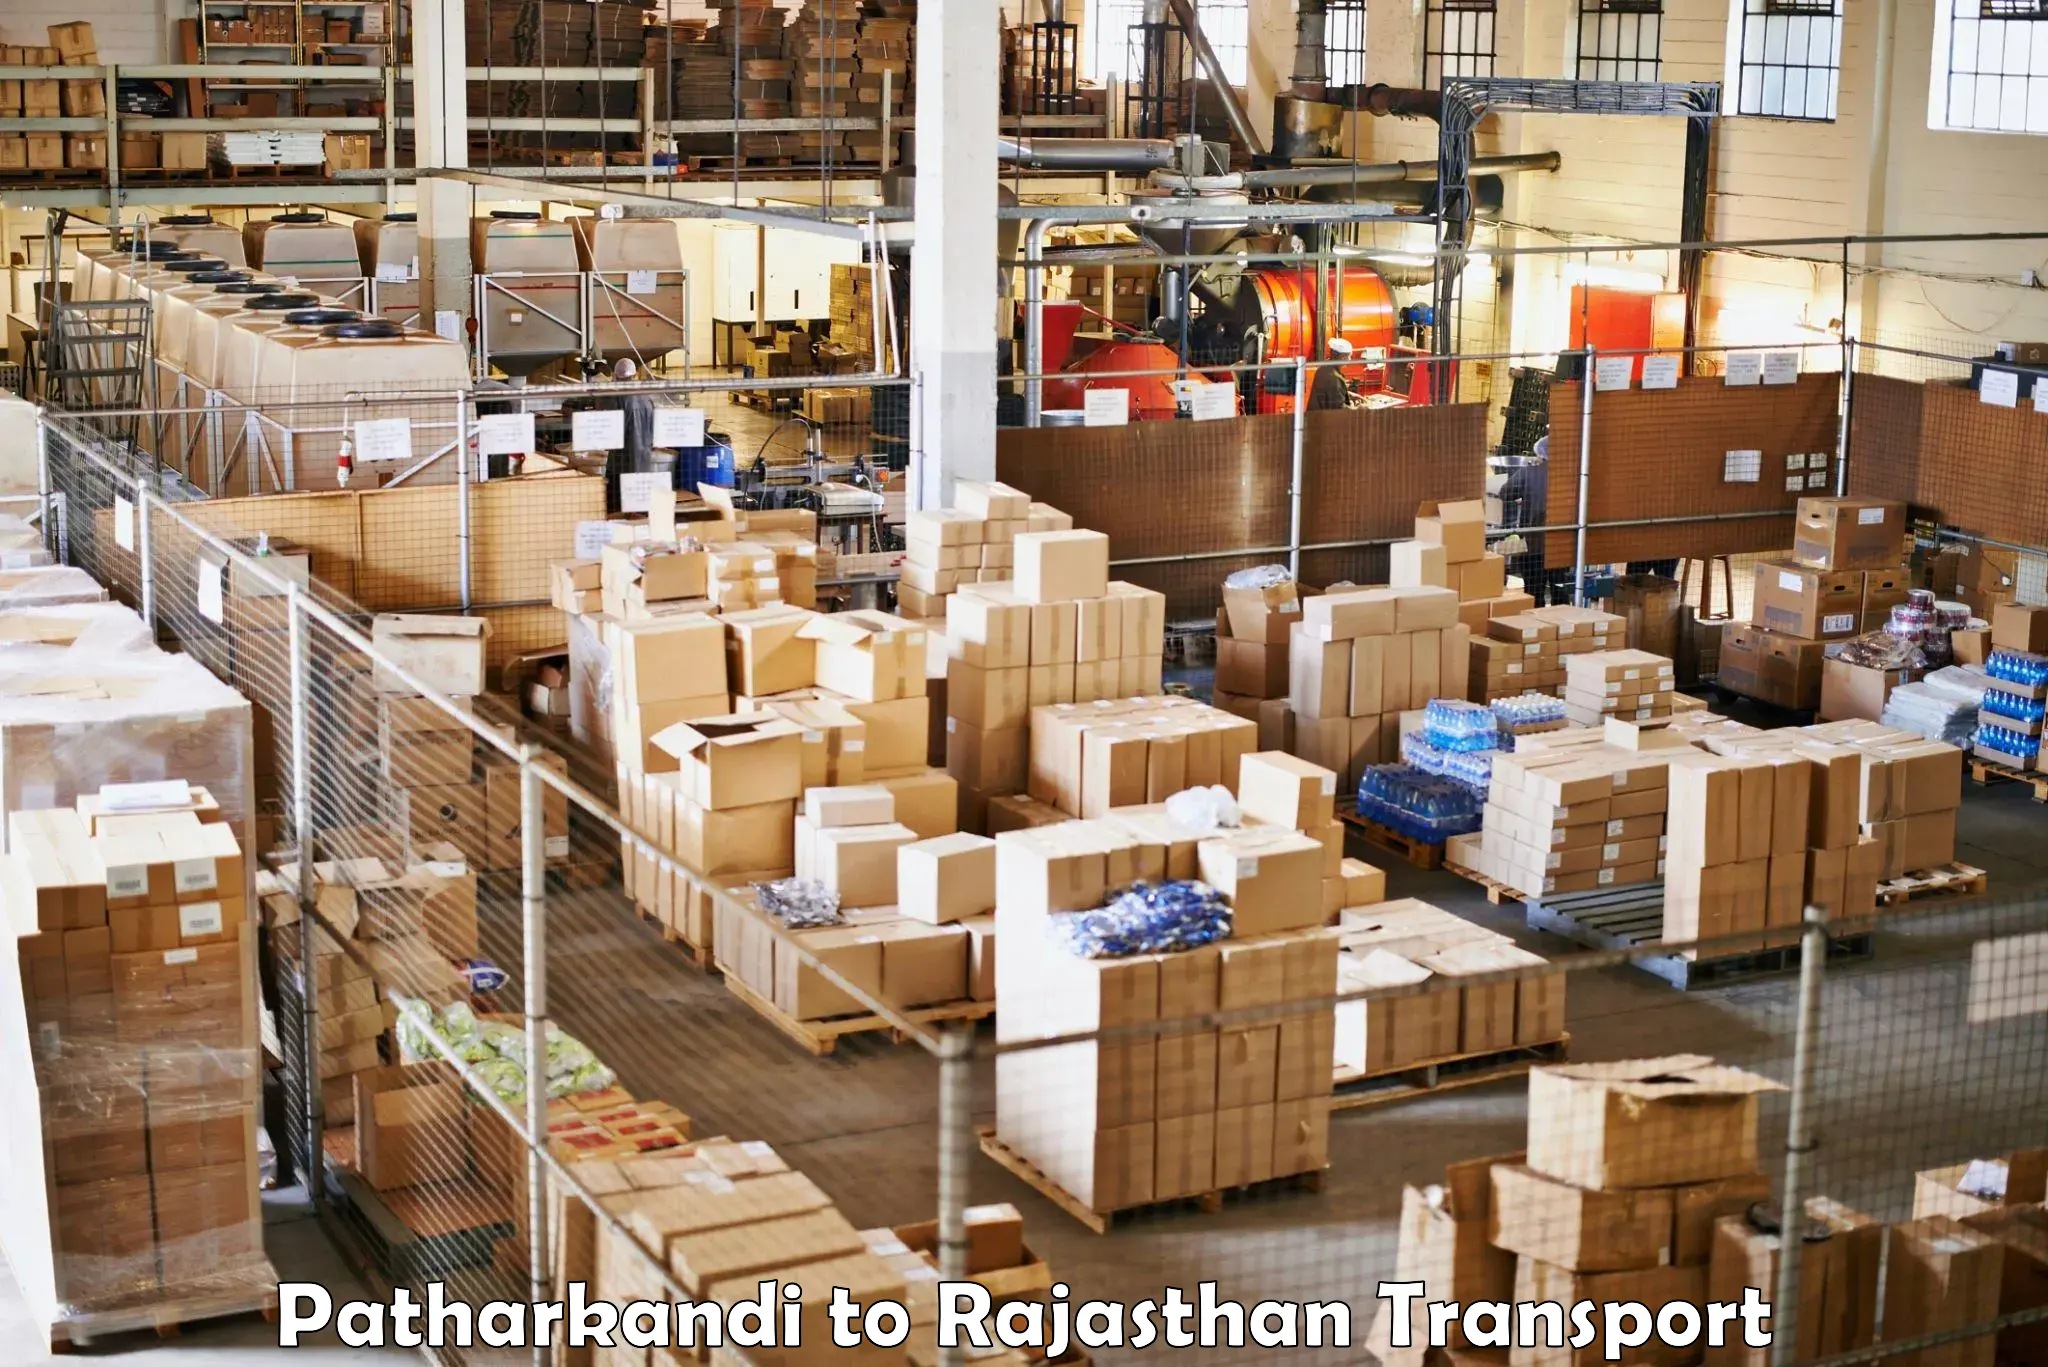 Daily parcel service transport in Patharkandi to Mathania